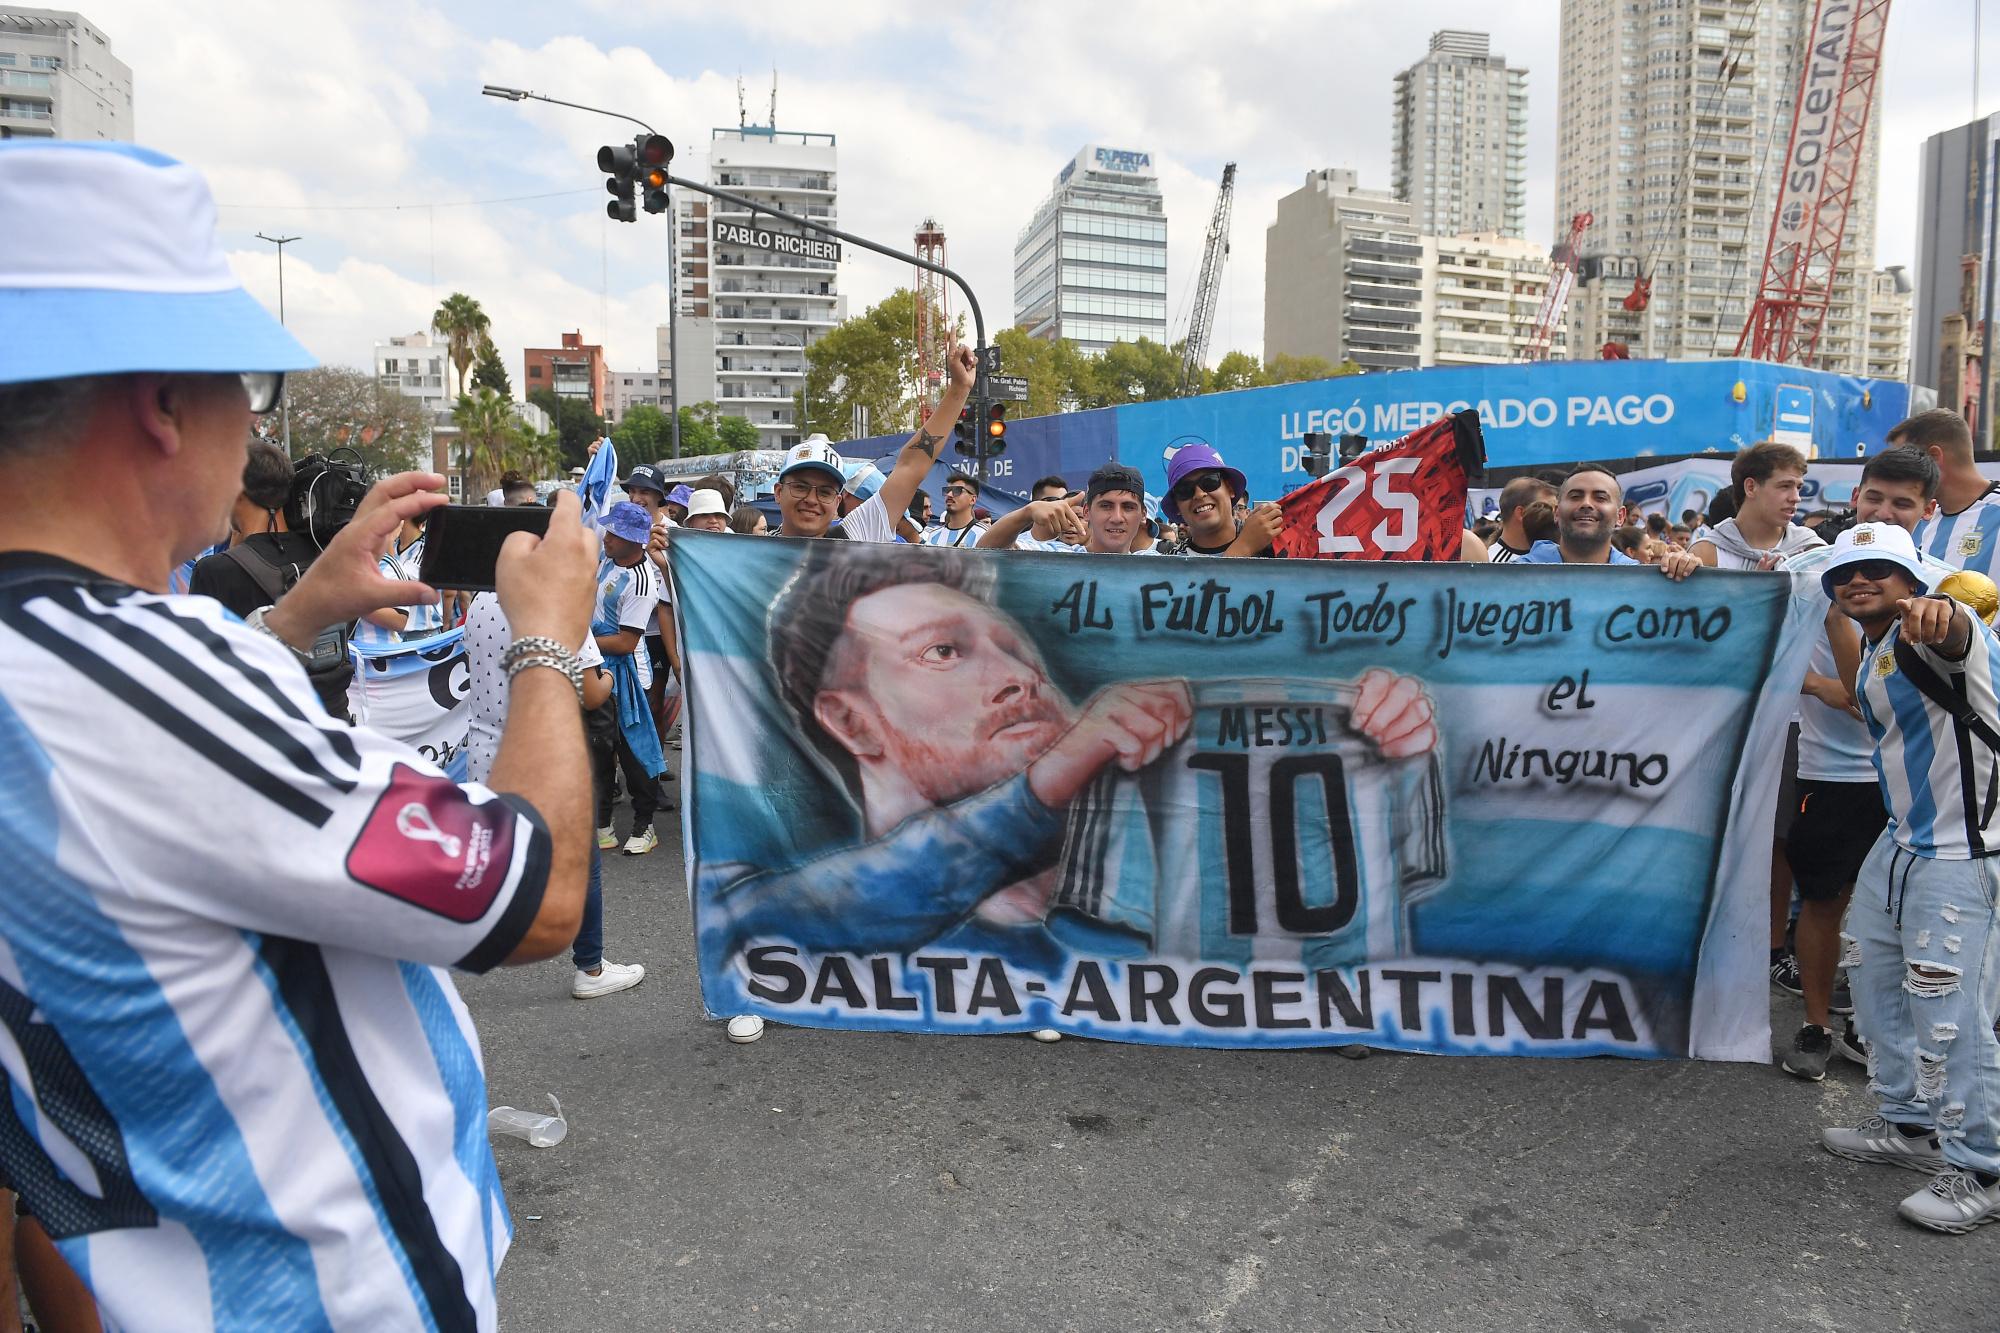 There were those who traveled from Salta to see the National Team